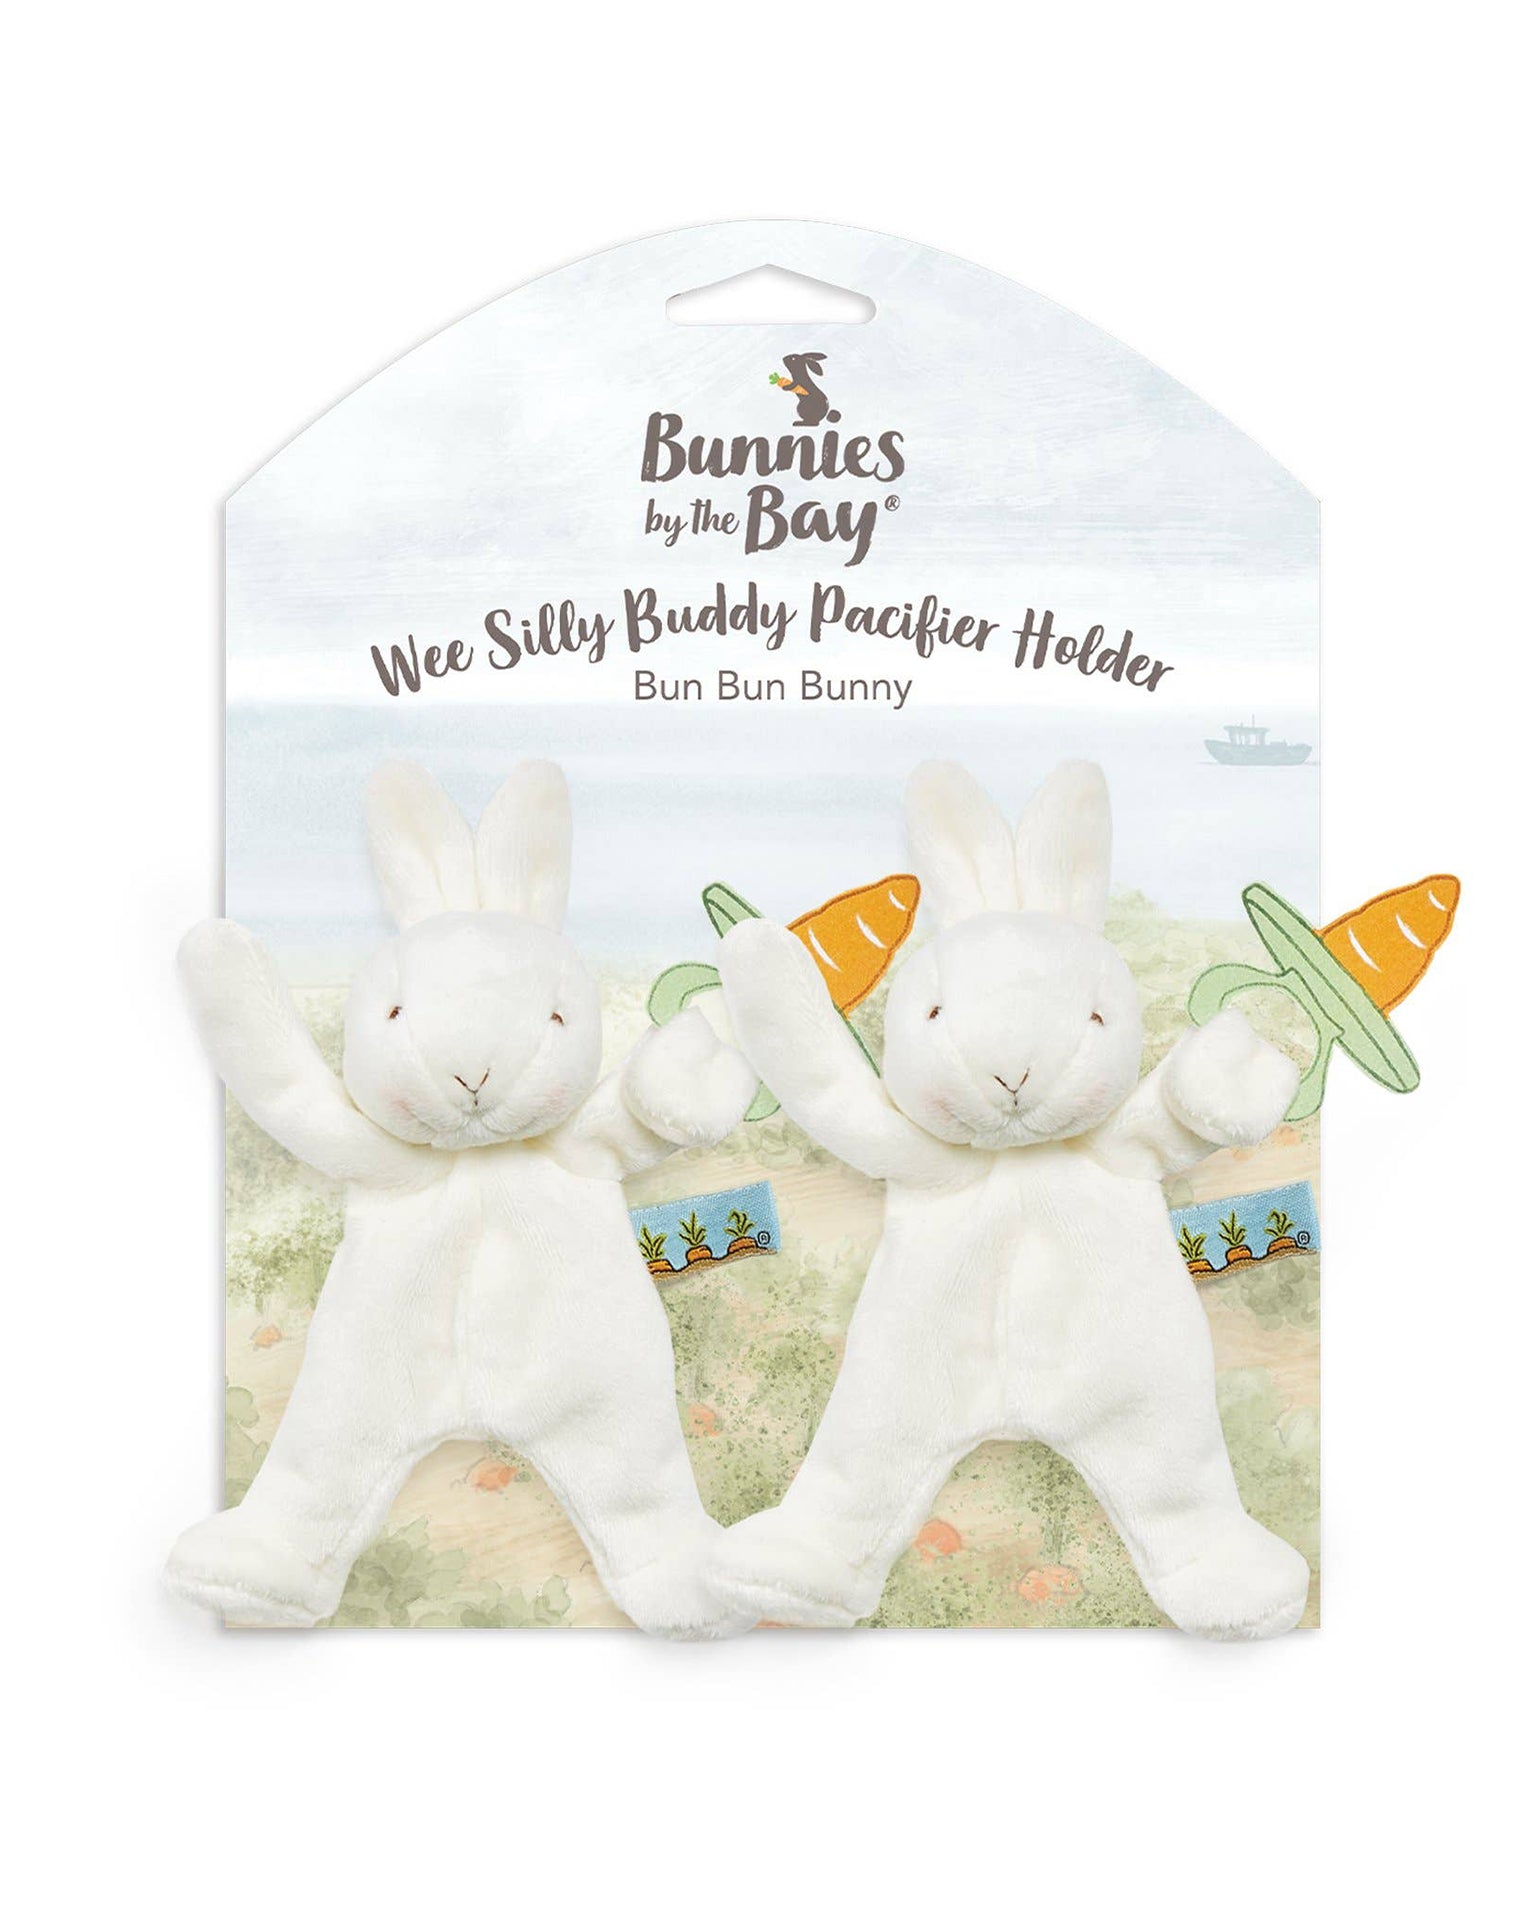 Little bunnies by the bay play wee silly white hare + a spare